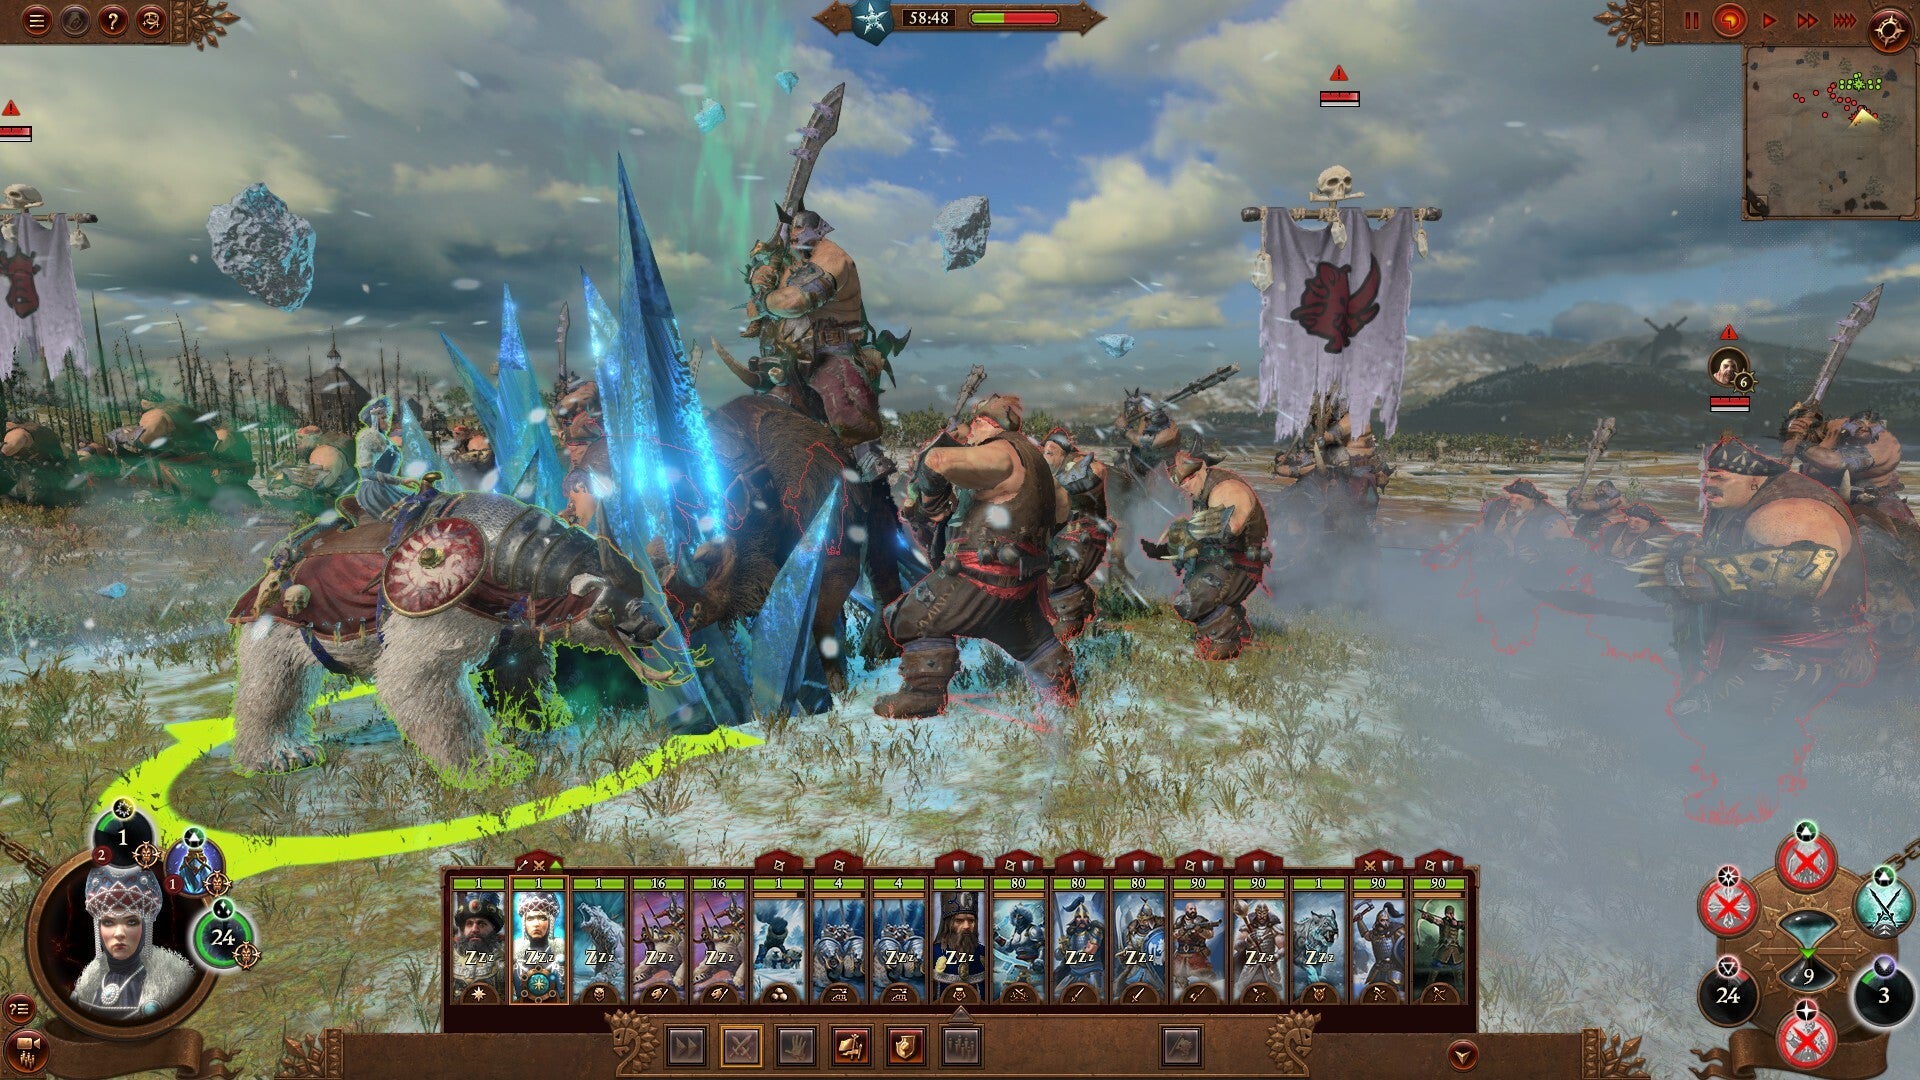 Kislev’s magic in Total War: Warhammer 3 combines powerful offense, buffs, and battlefield control.